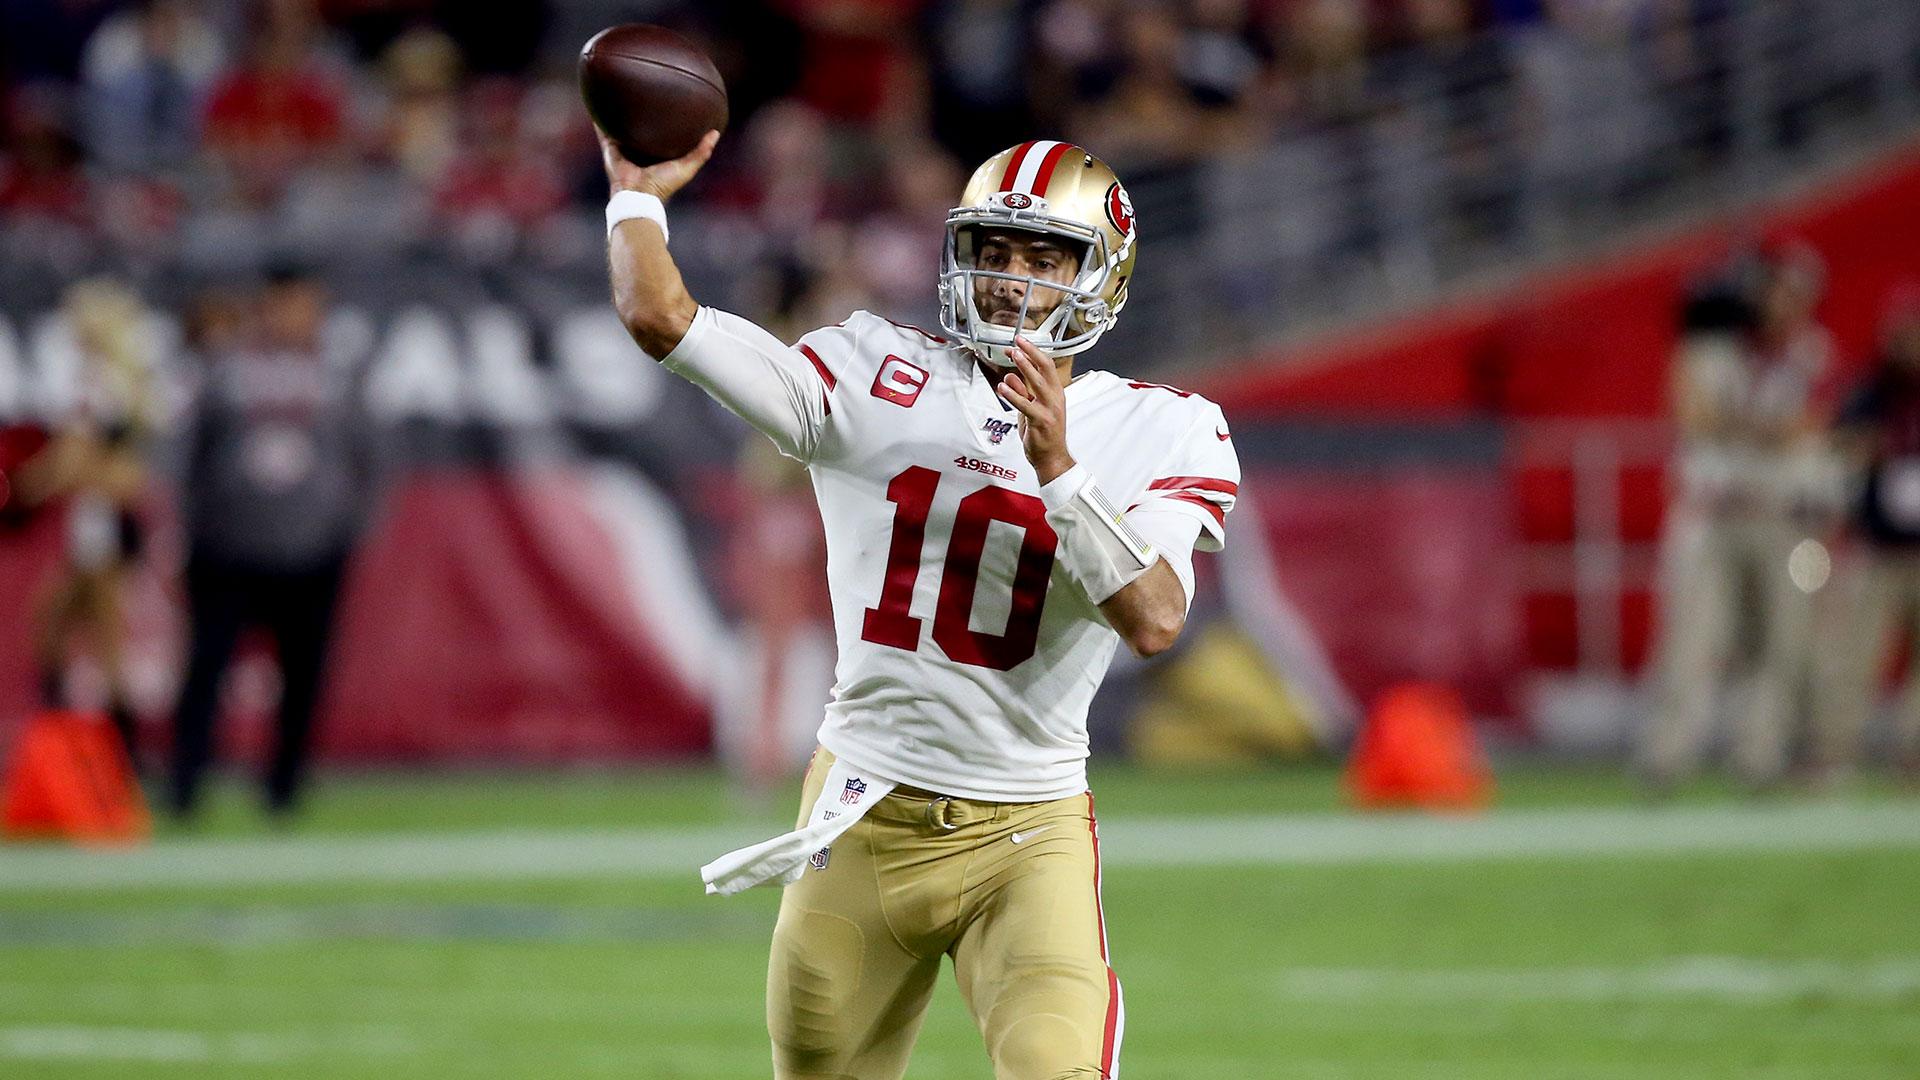 Why Stephen A. Smith is wrong to call 49ers QB Jimmy